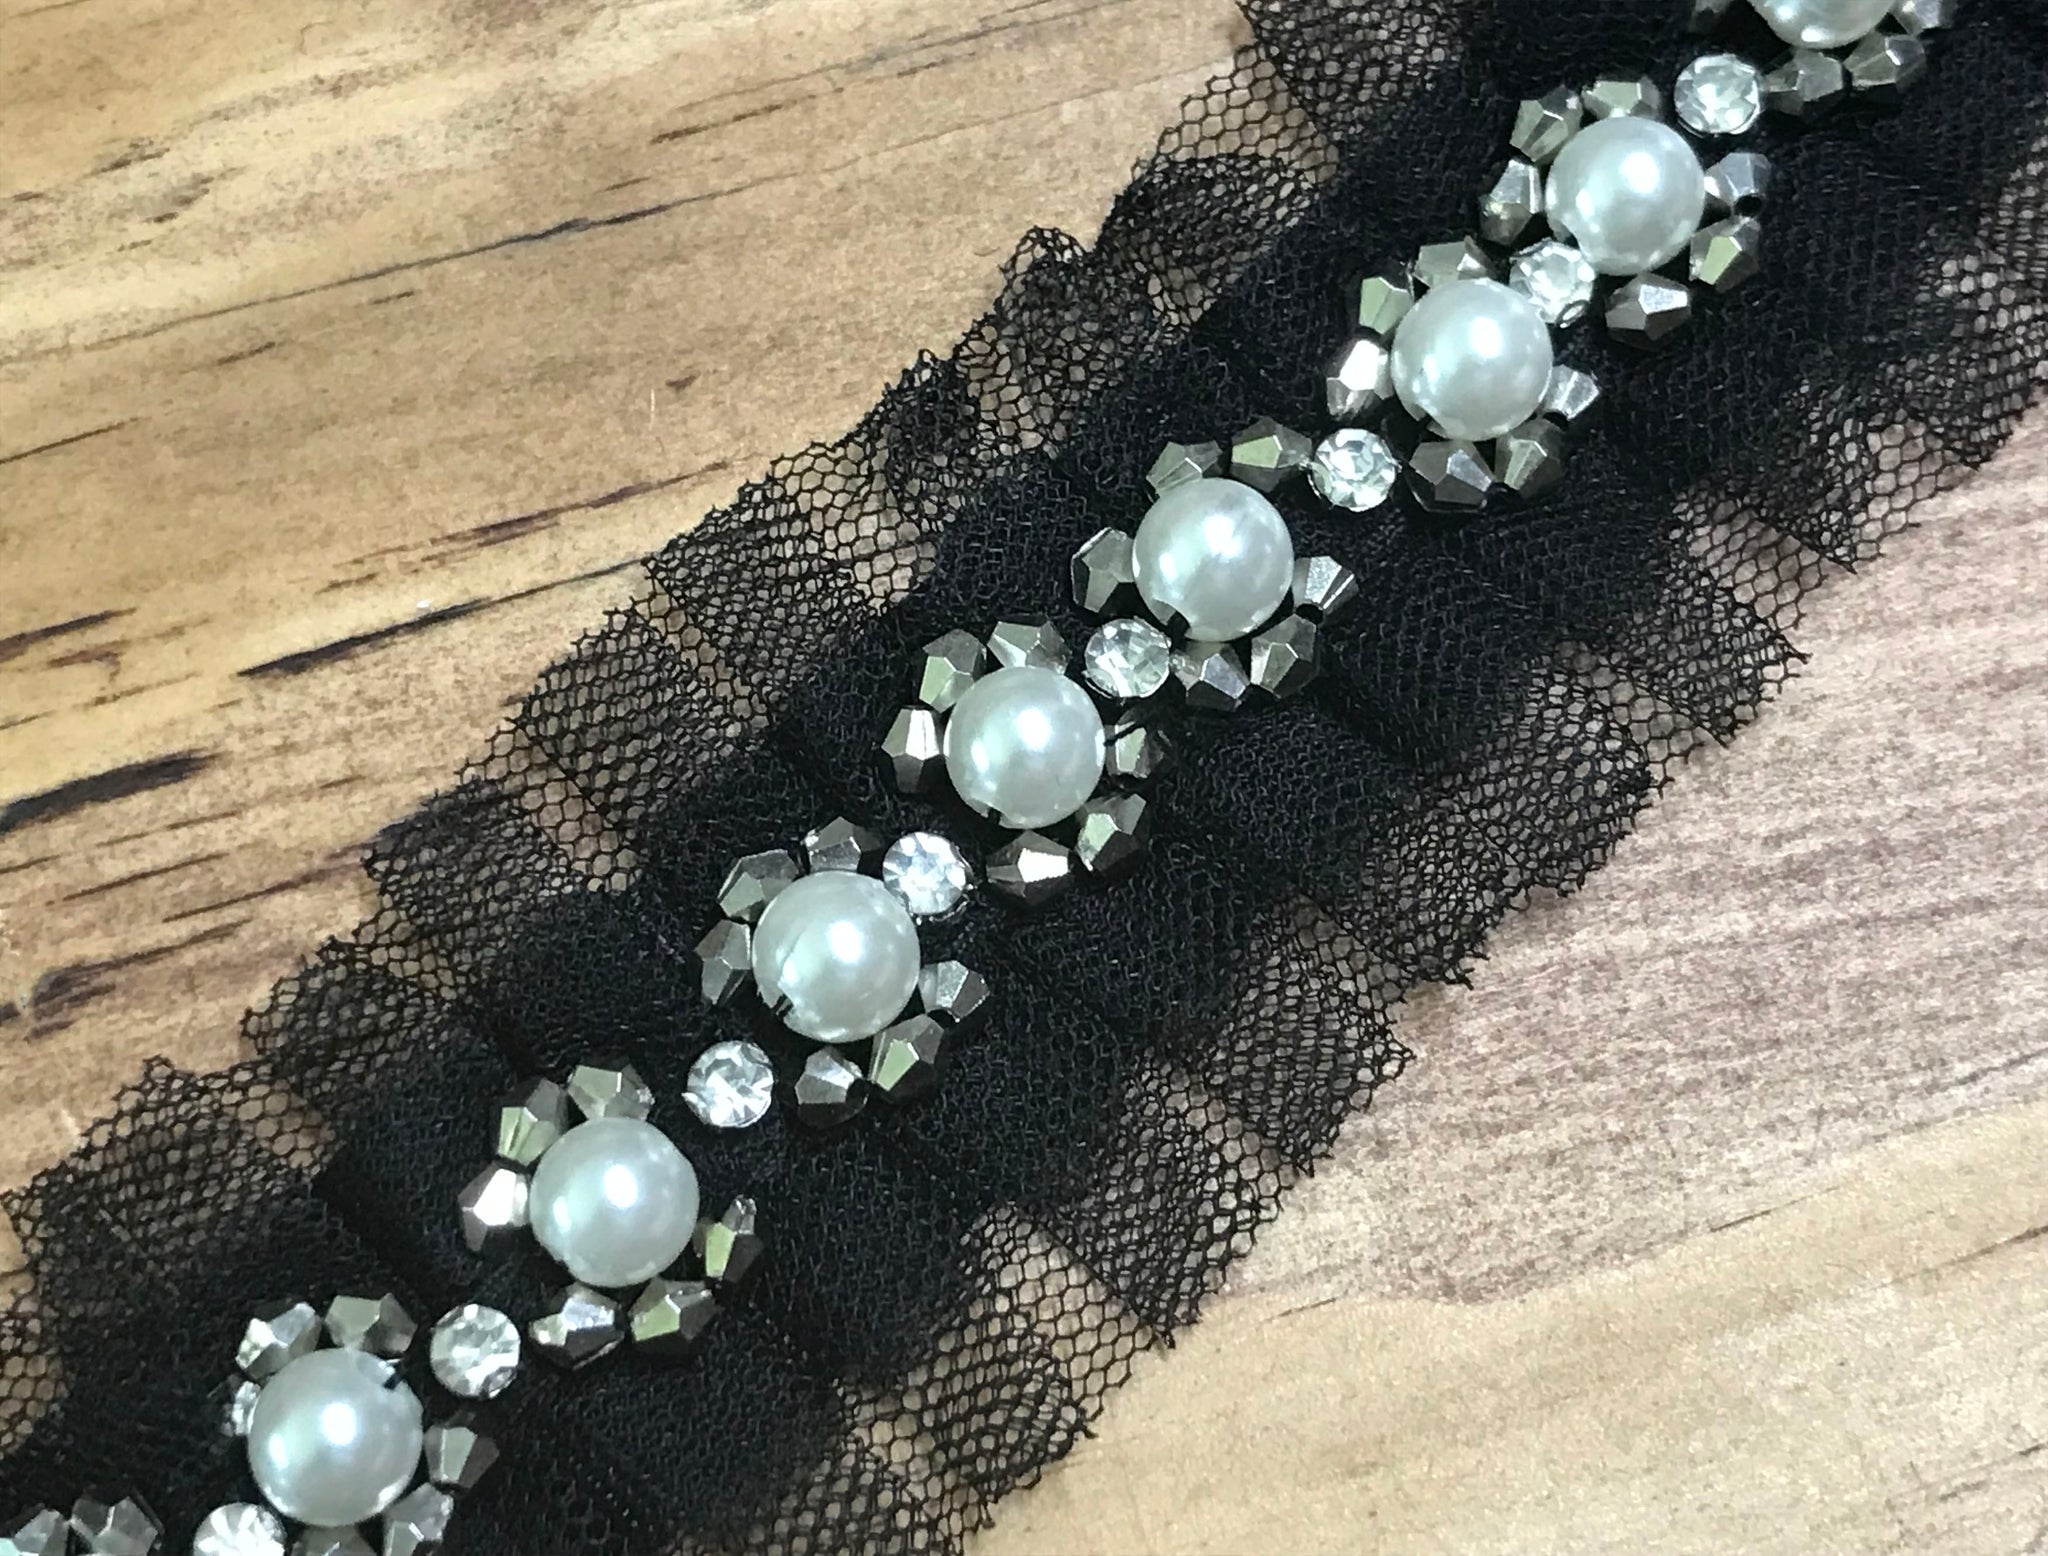 Pearls/Glass Beads/Alloy Beads  on Ruffled Tulle Background  -  Beaded Trim - 4.2 cm Wide.